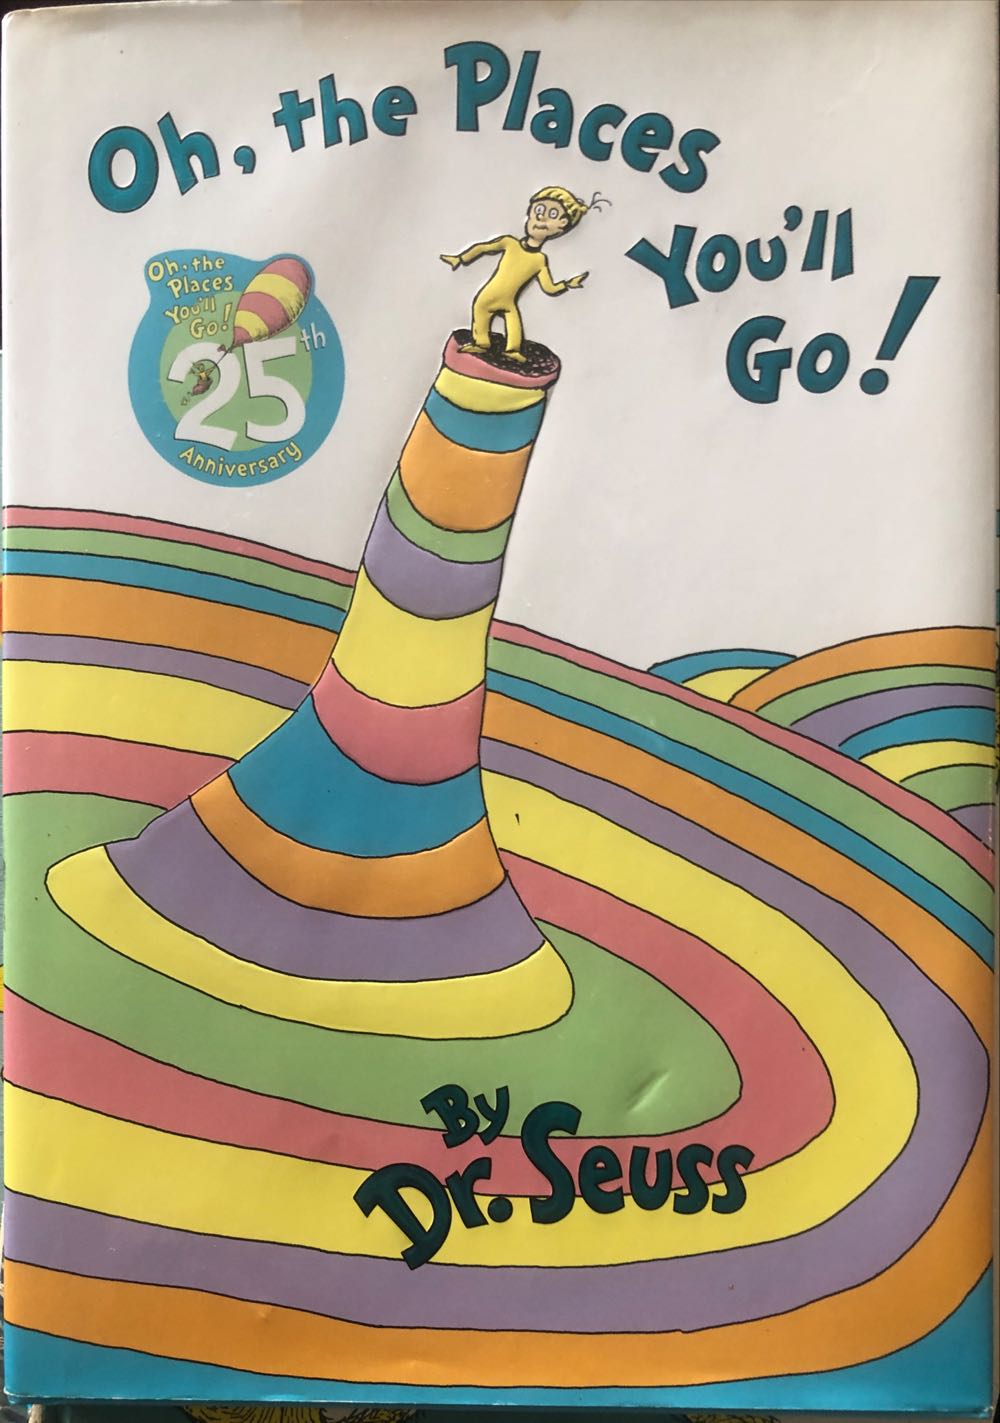 Oh, the Places You’ll Go! - Dr. Seuss (Random House, Inc. - Hardcover) book collectible [Barcode 9780679805274] - Main Image 3